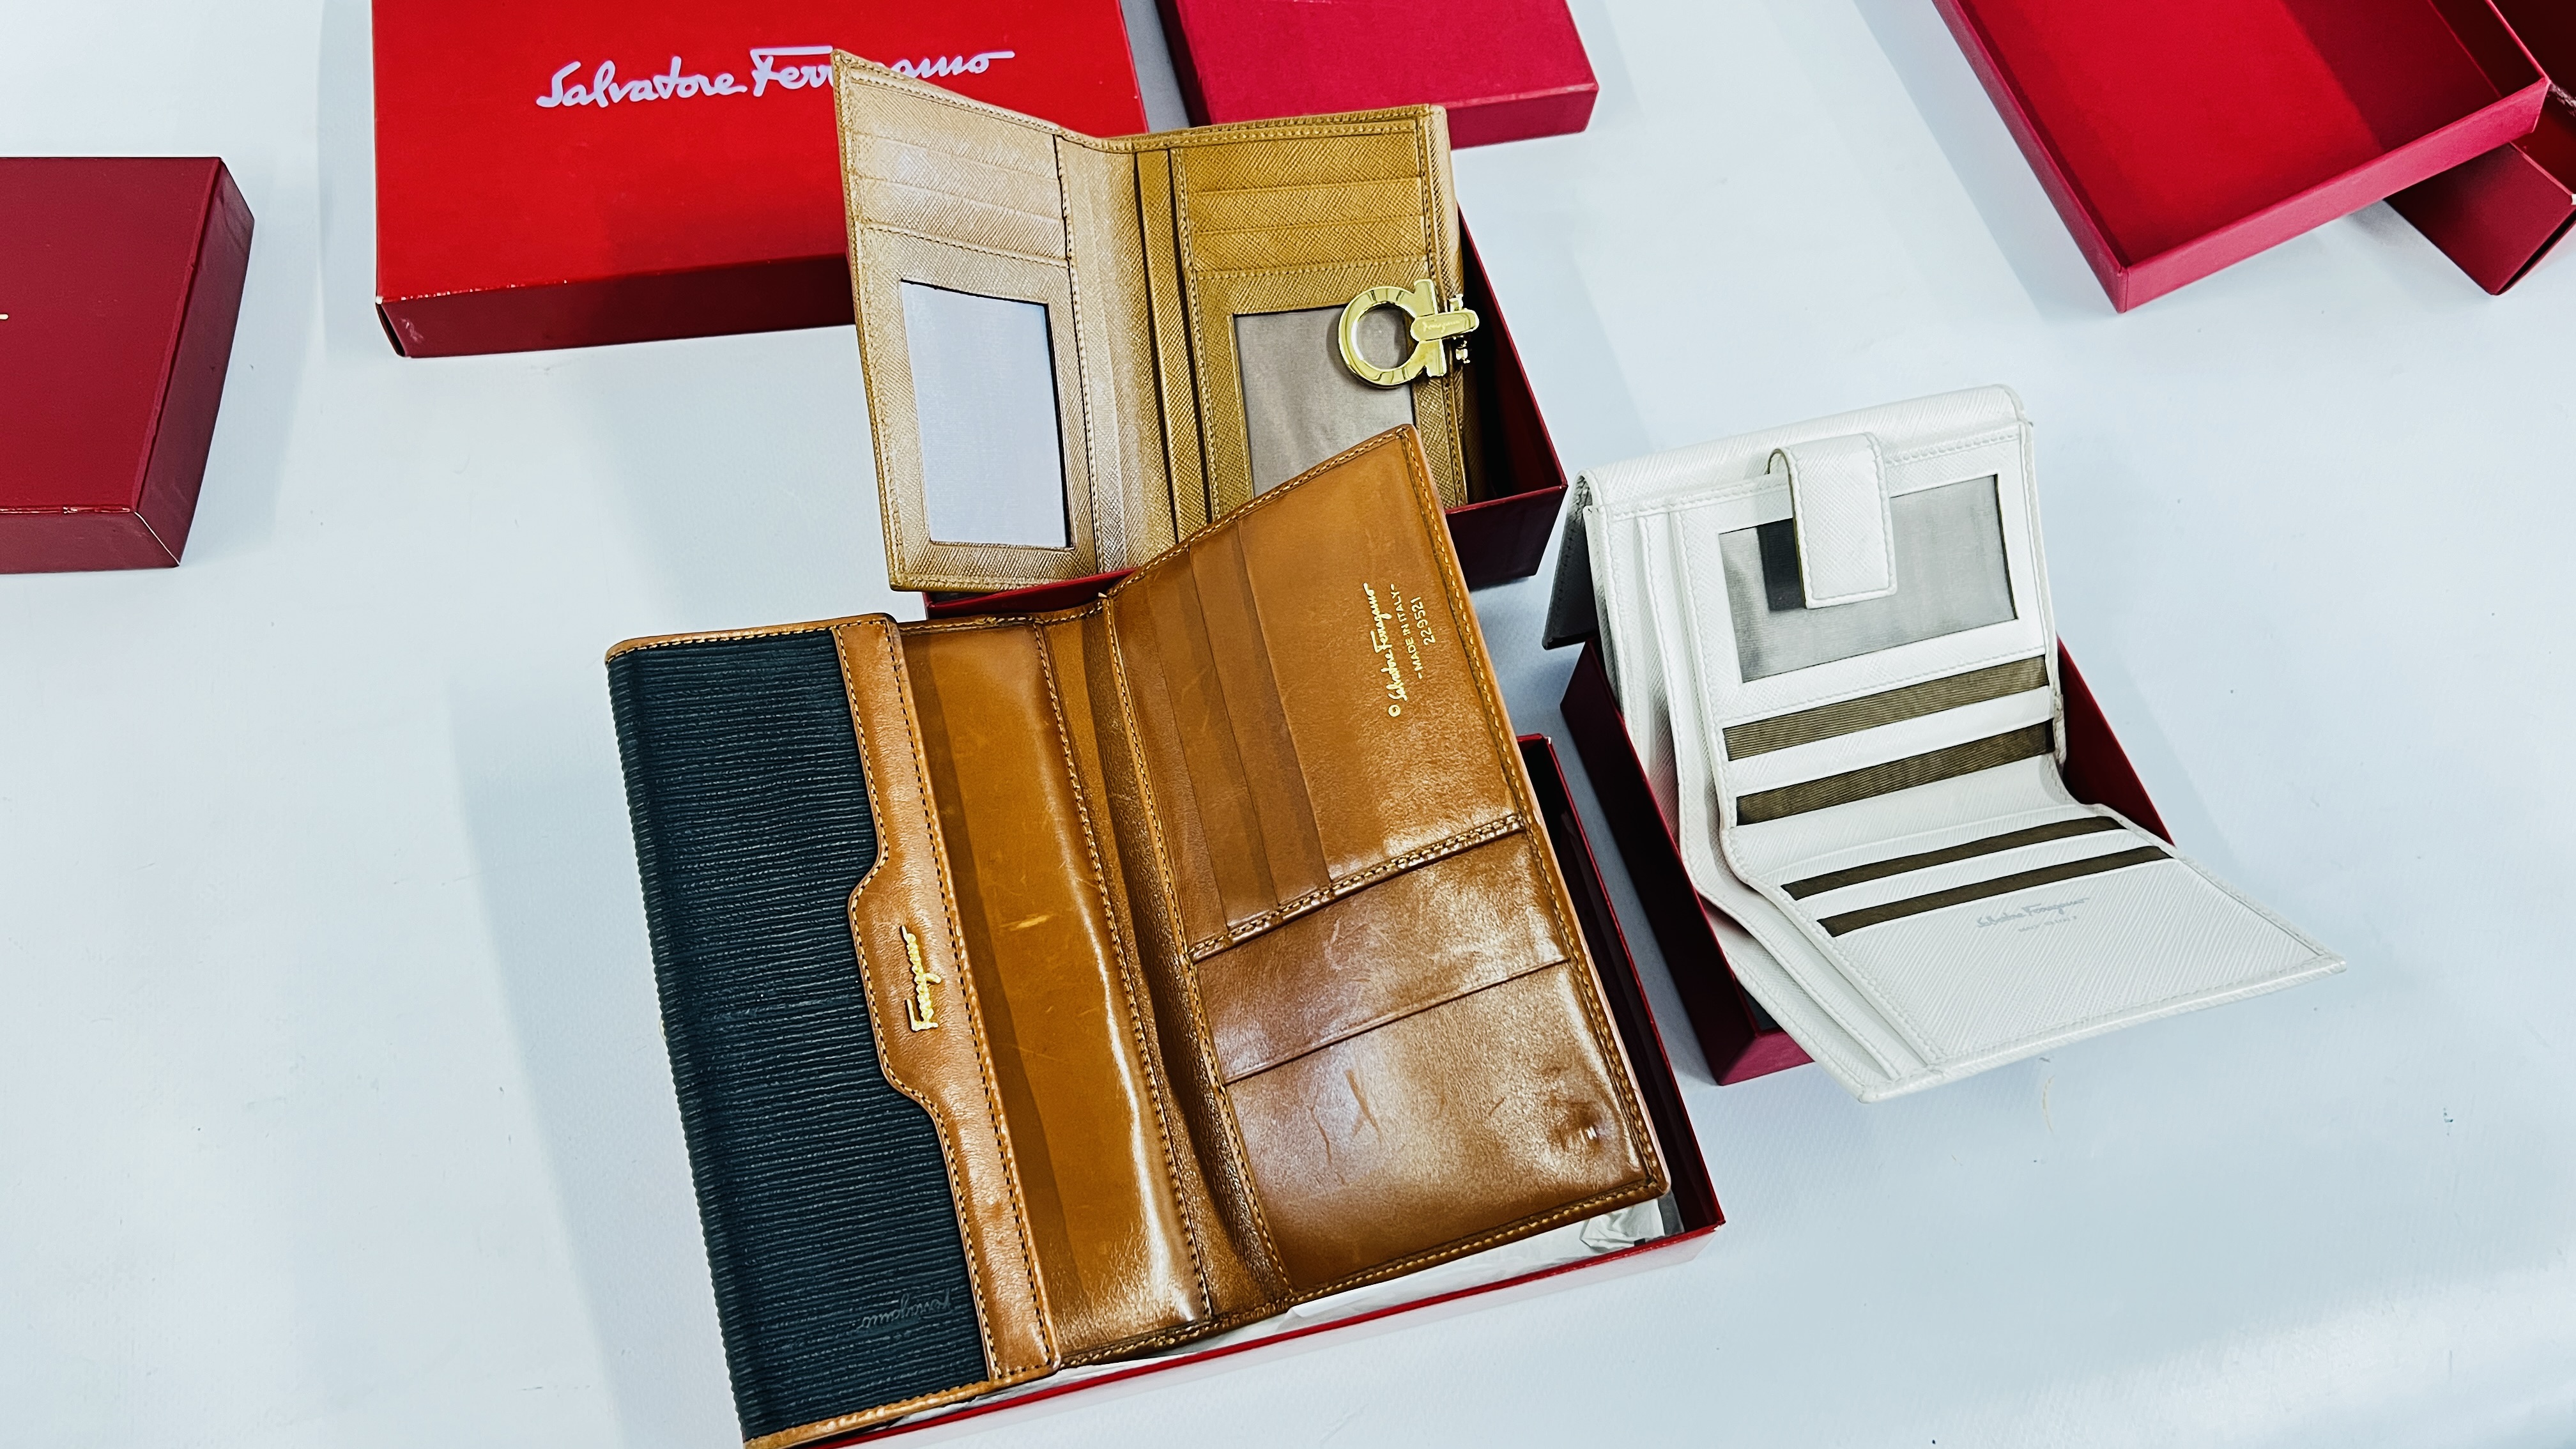 A GROUP OF 6 BOXED DESIGNER PURSES MARKED "SALVADOR FERRAGAMA". - Image 5 of 5